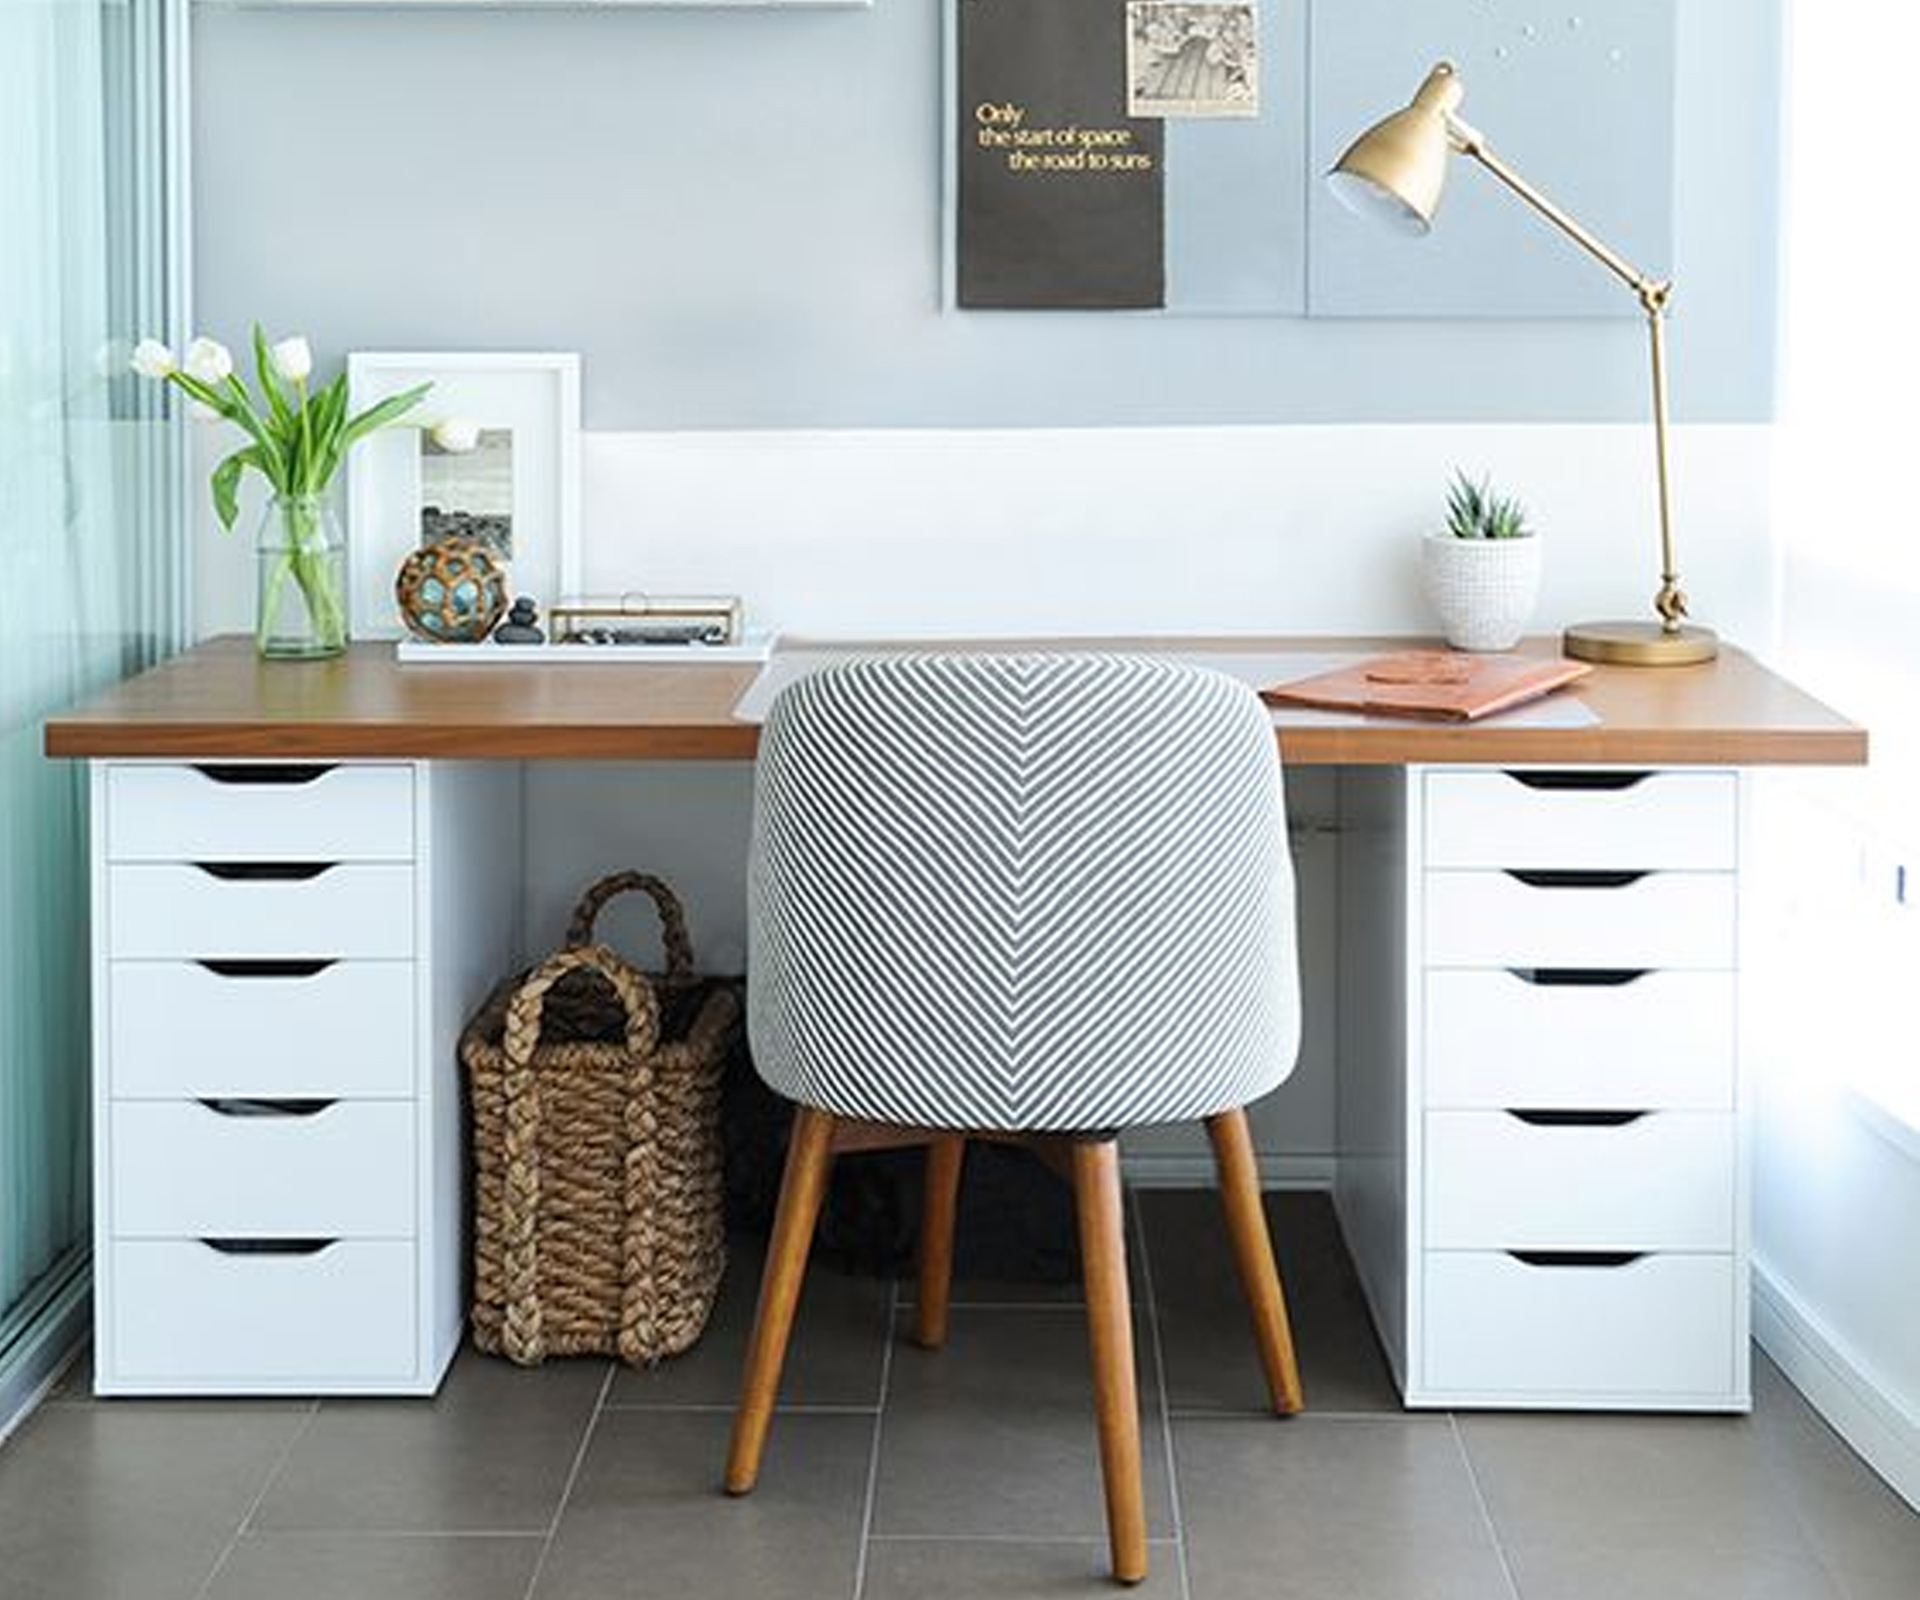 Your guide to creating the perfect at-home office space